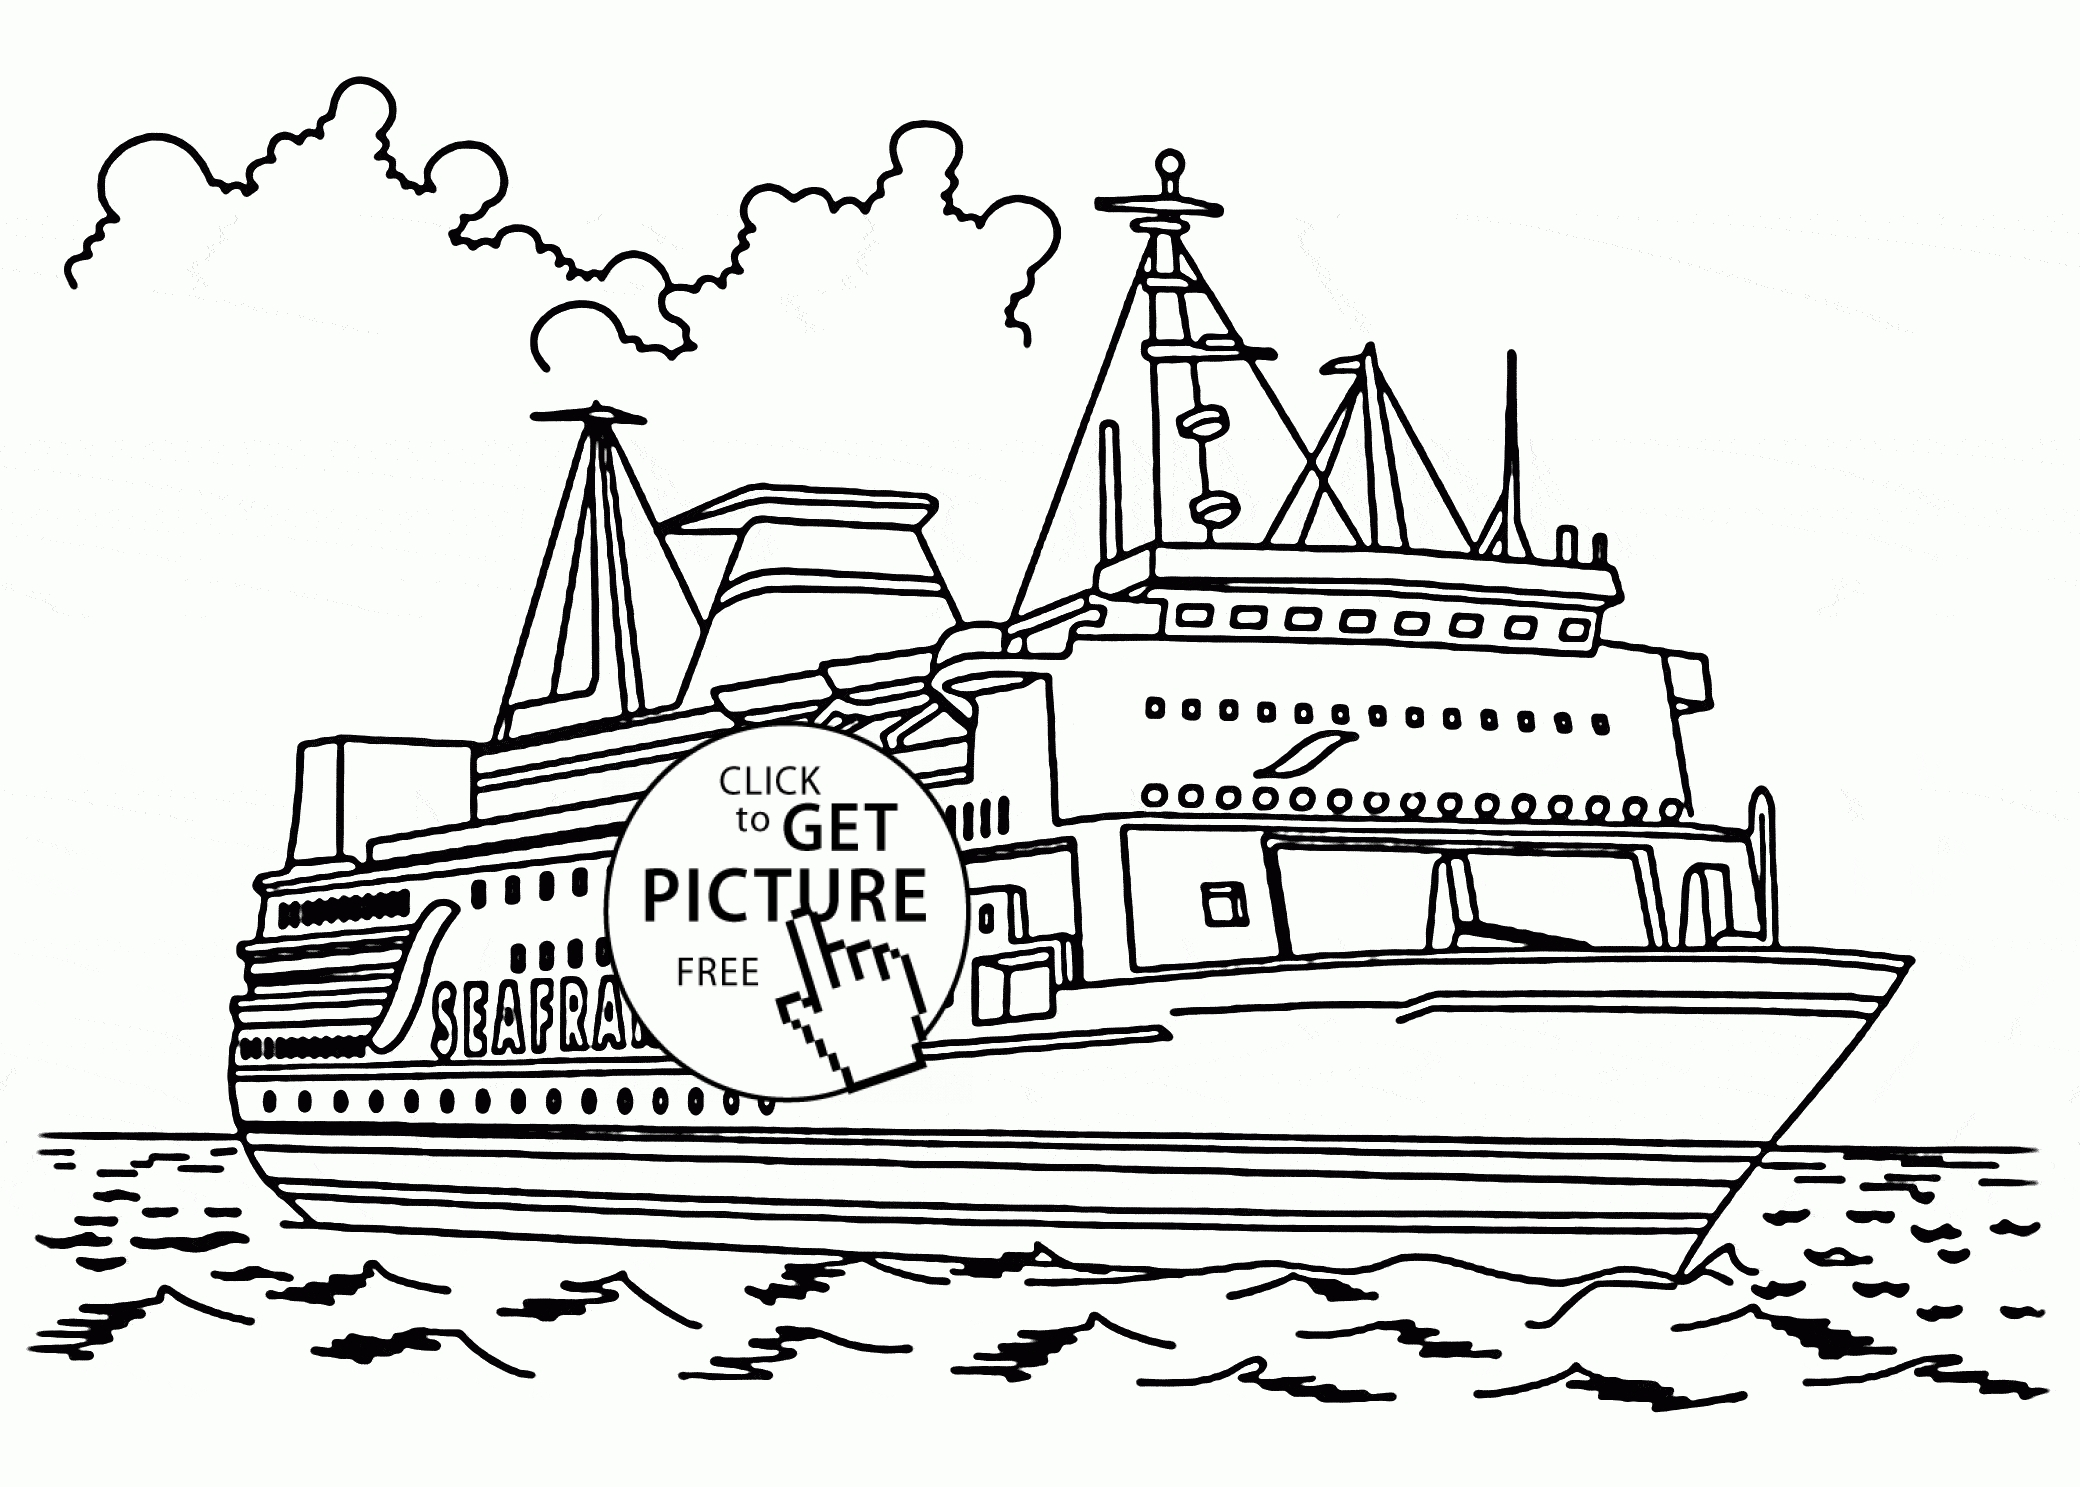 Columbus Ships Coloring Pages Best Of Fast Boat Coloring Page For Kids Transportation Coloring